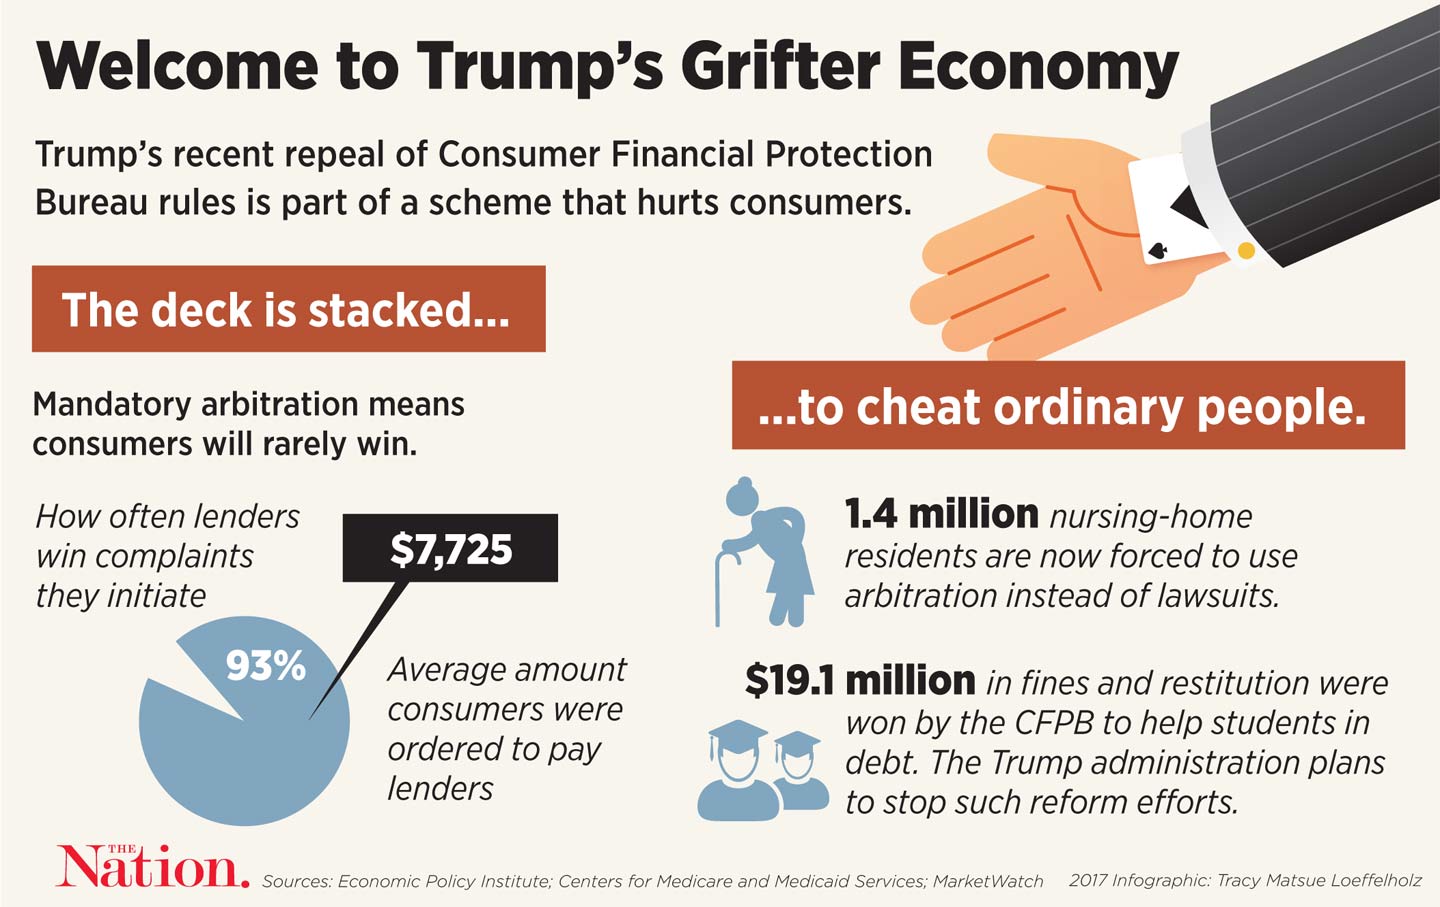 Trump Is Creating a Grifter Economy